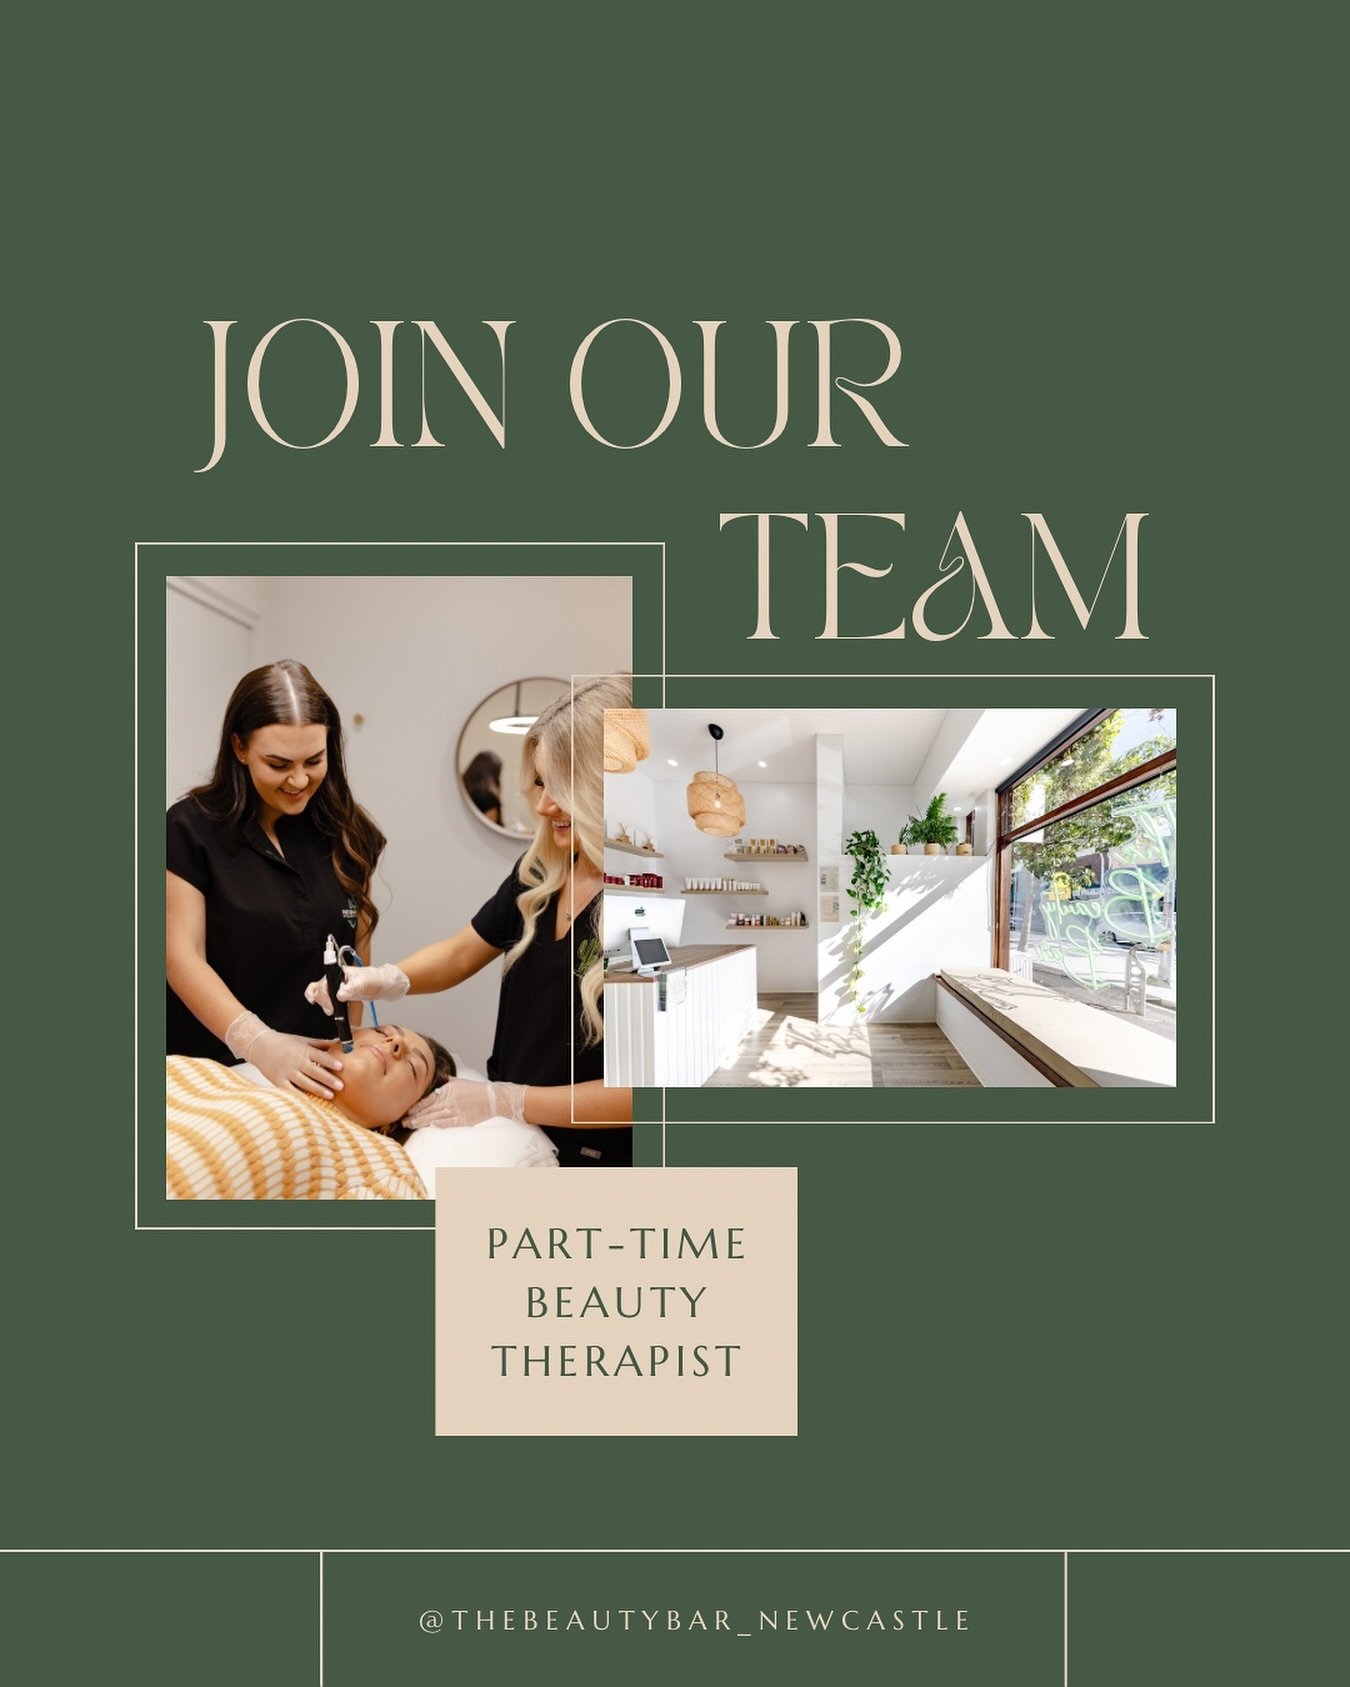 Join our team at The Beauty Bar!

We currently have a part-time beauty therapist position available at our salon in Cooks Hill.

🌵 Our salon is a fast-paced and dynamic environment
🌵 We offer traditional beauty &amp; advance skin treatments such as